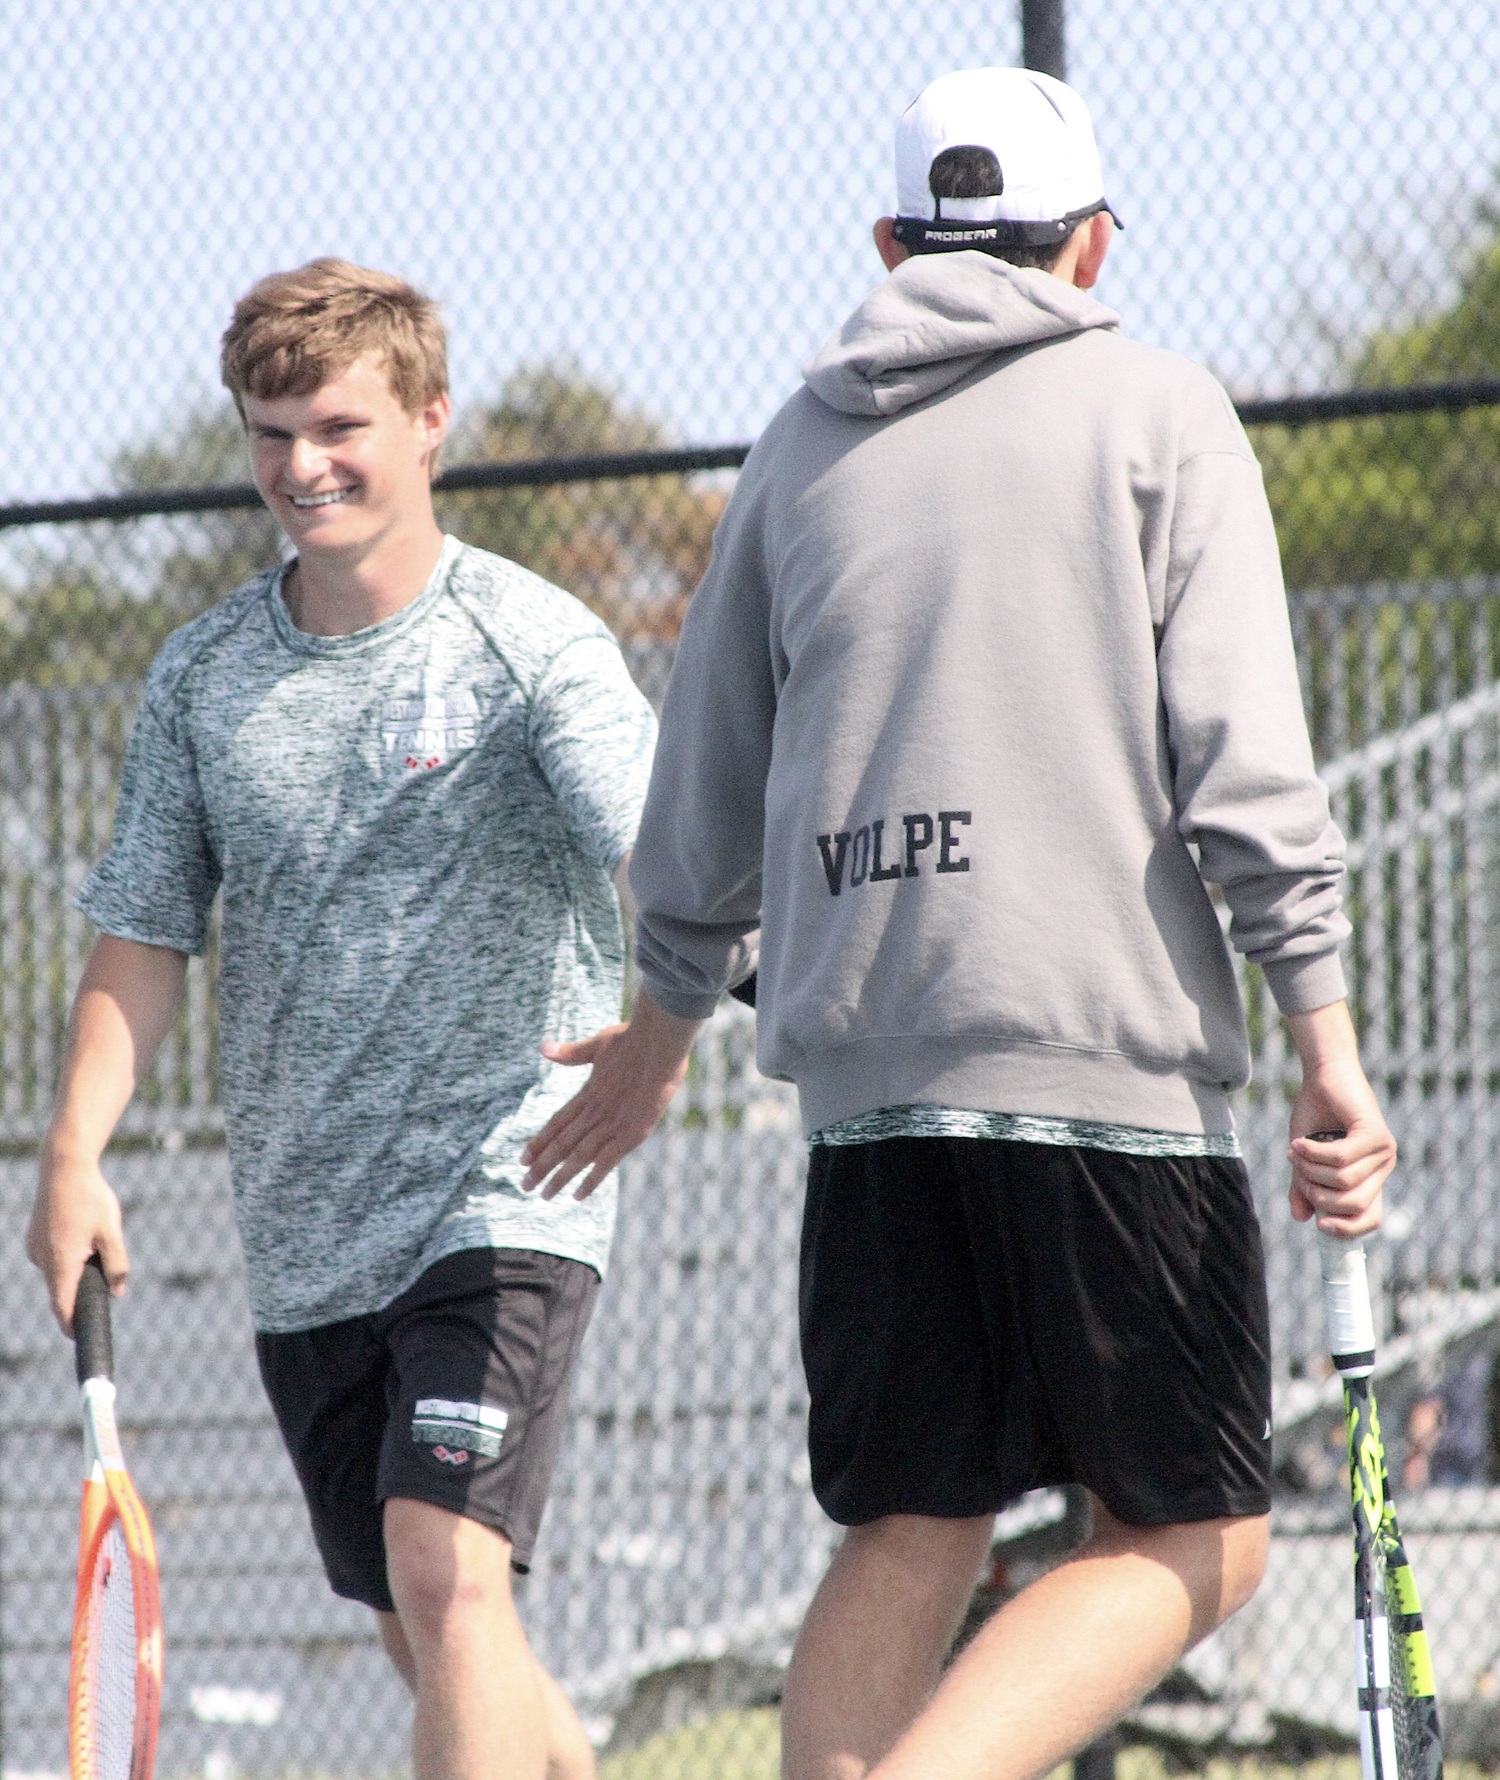 Junior Bobby Stabile celebrates a point with doubles partner Giancarlo Volpe. DESIRÉE KEEGAN